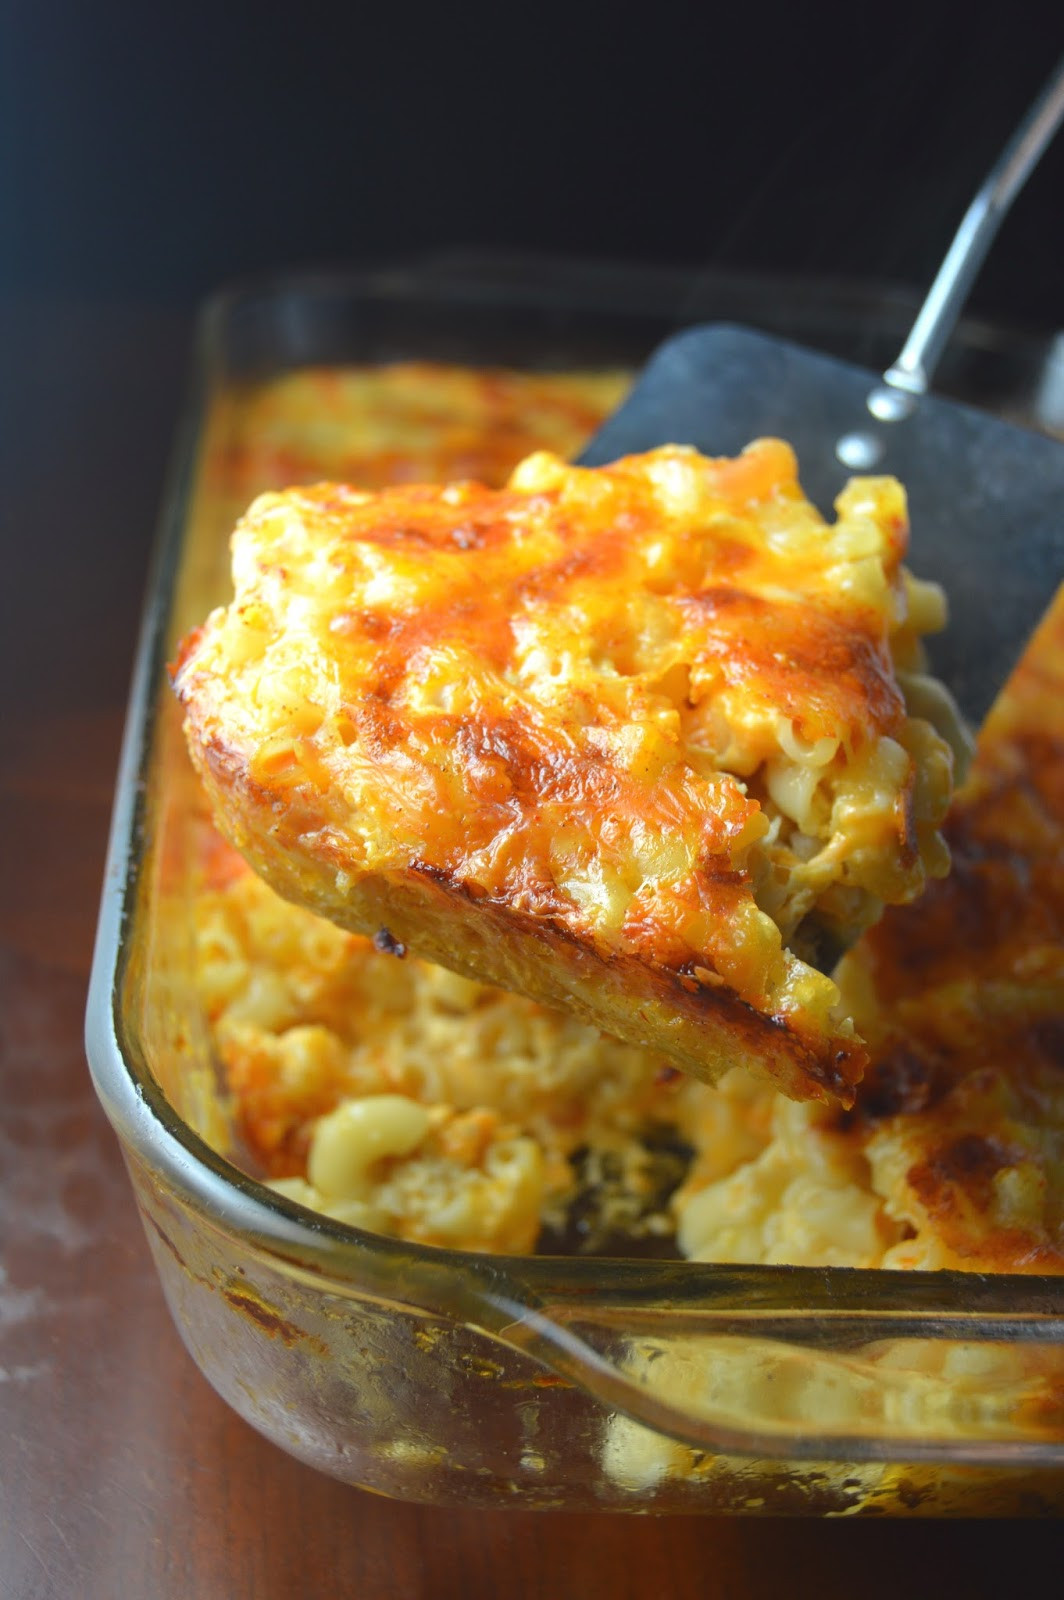 Simple Baked Macaroni And Cheese Recipe
 Baked Macaroni and Cheese